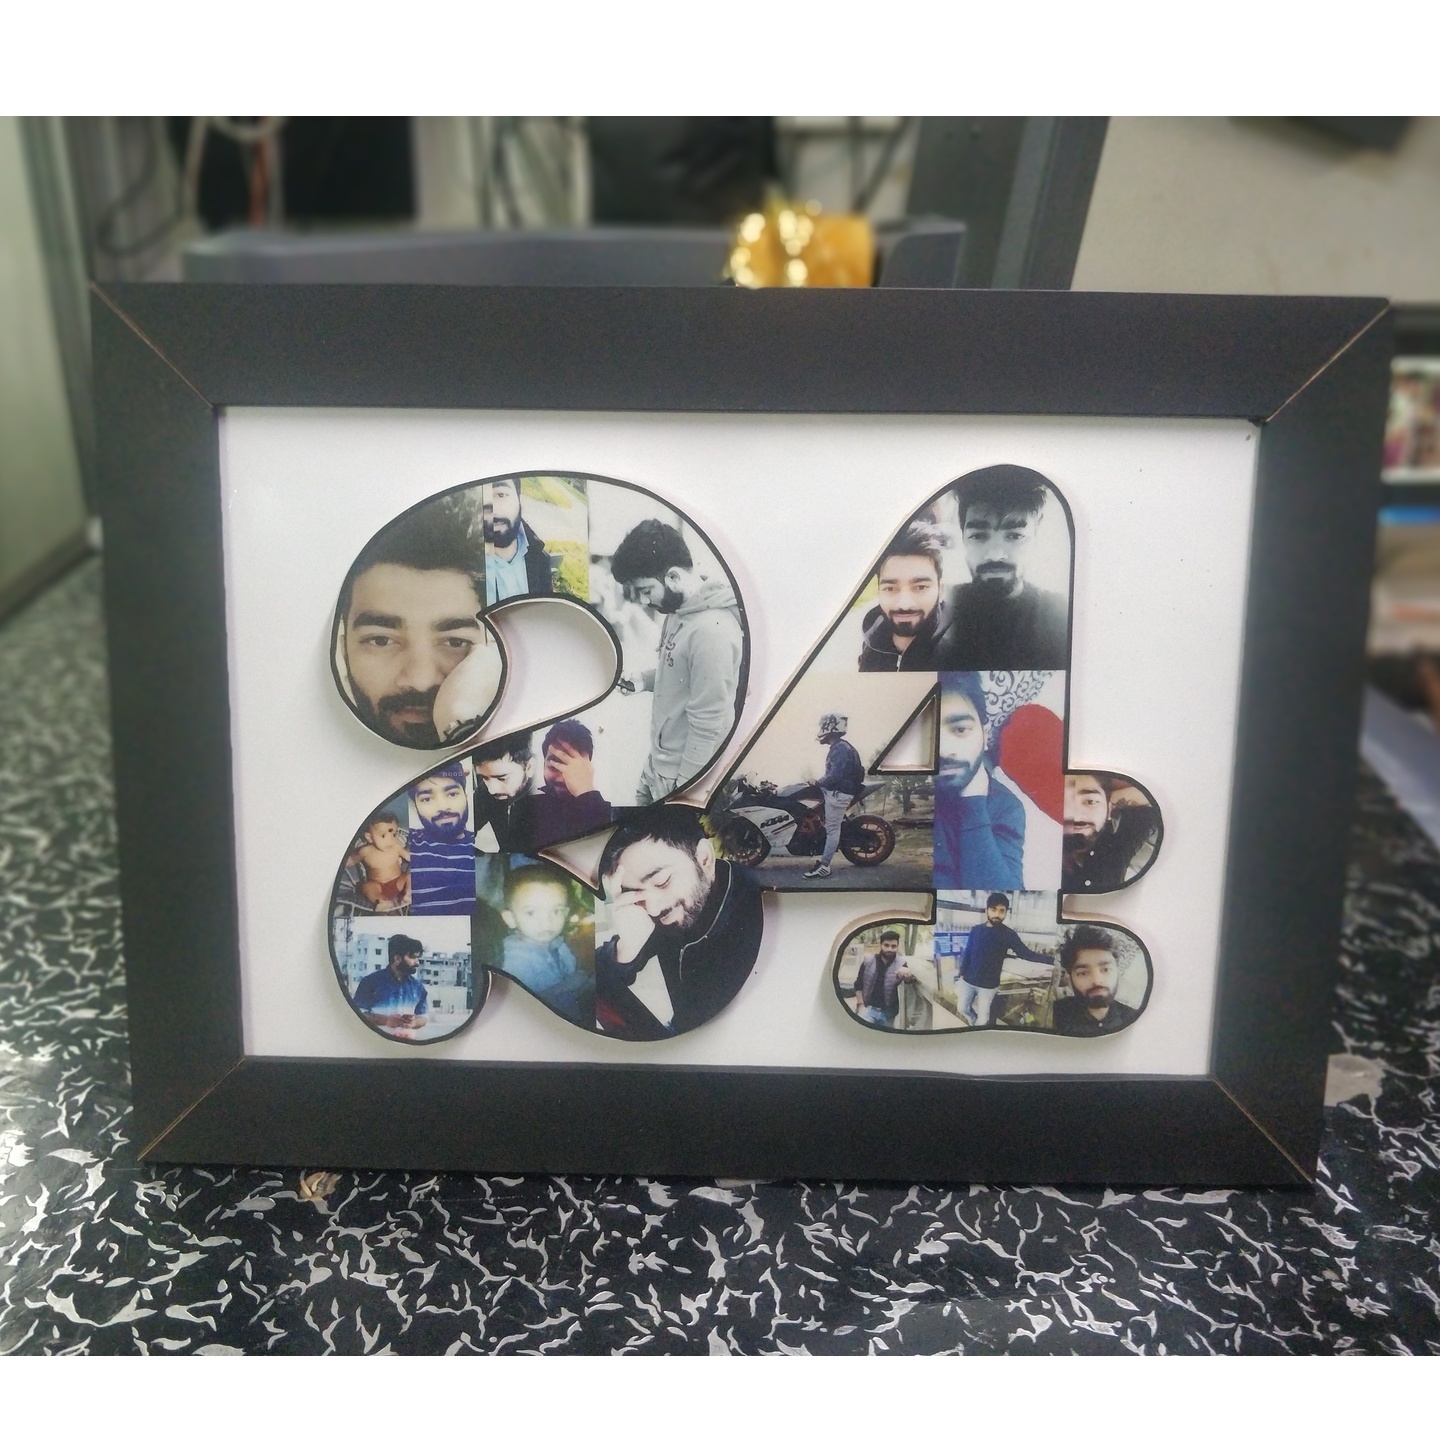  4d Customize Initial Or Numeric With Frame ( Size 8x12 inches, Black , Wooden )